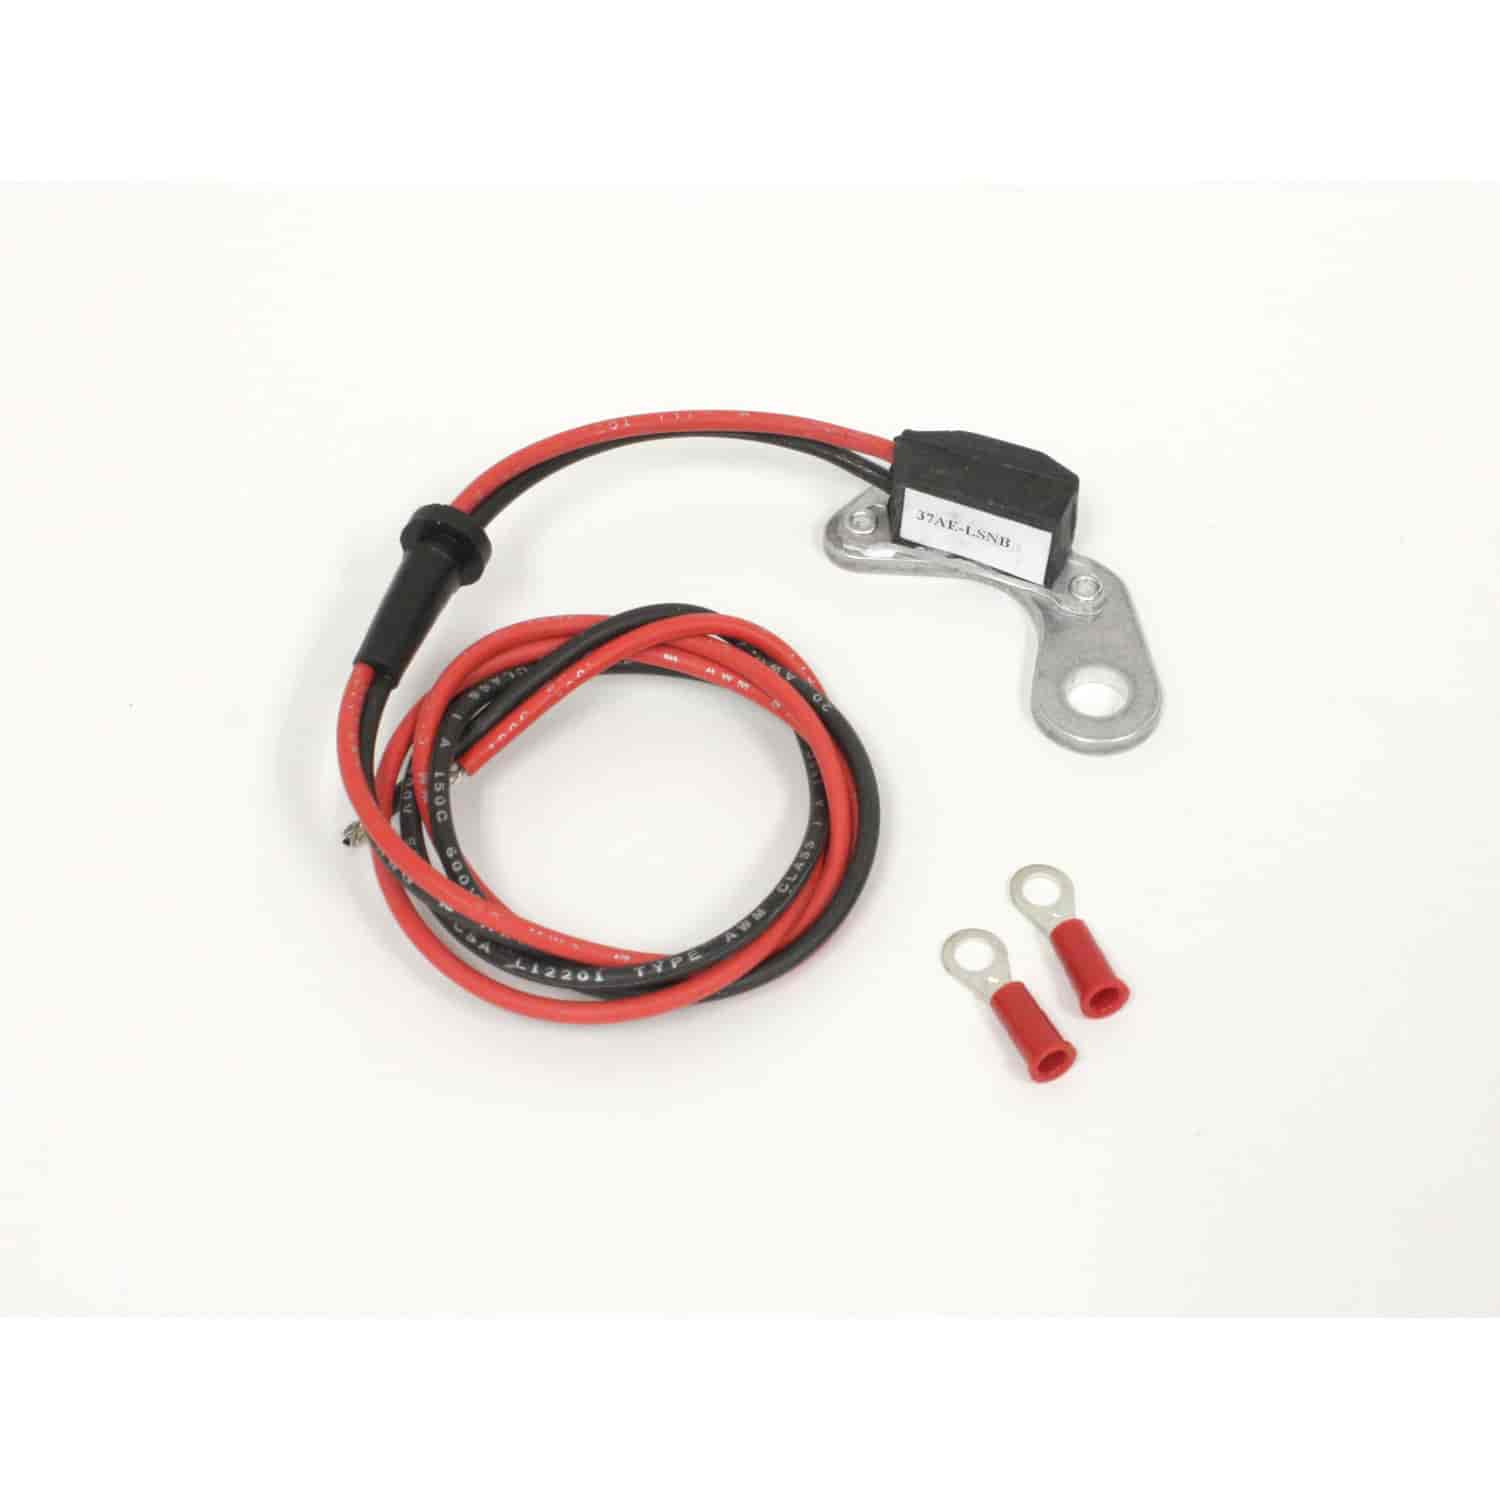 Ignitor for Nissan Patrol 6 c Carb Approved